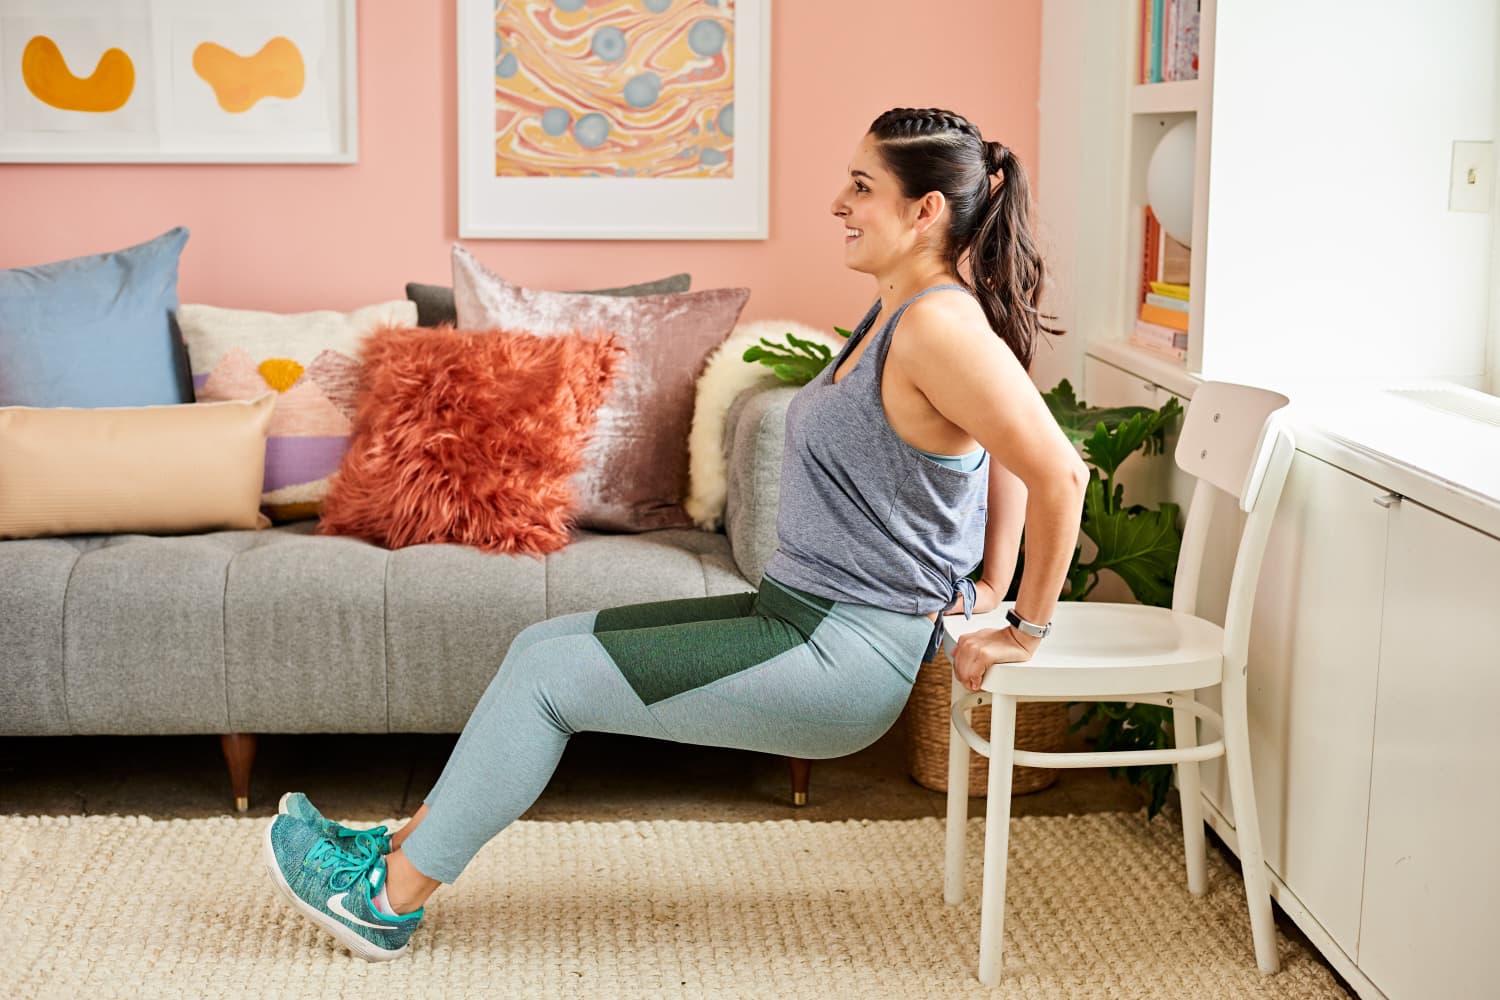 At home chair exercises: a simple yet effective way to keep moving